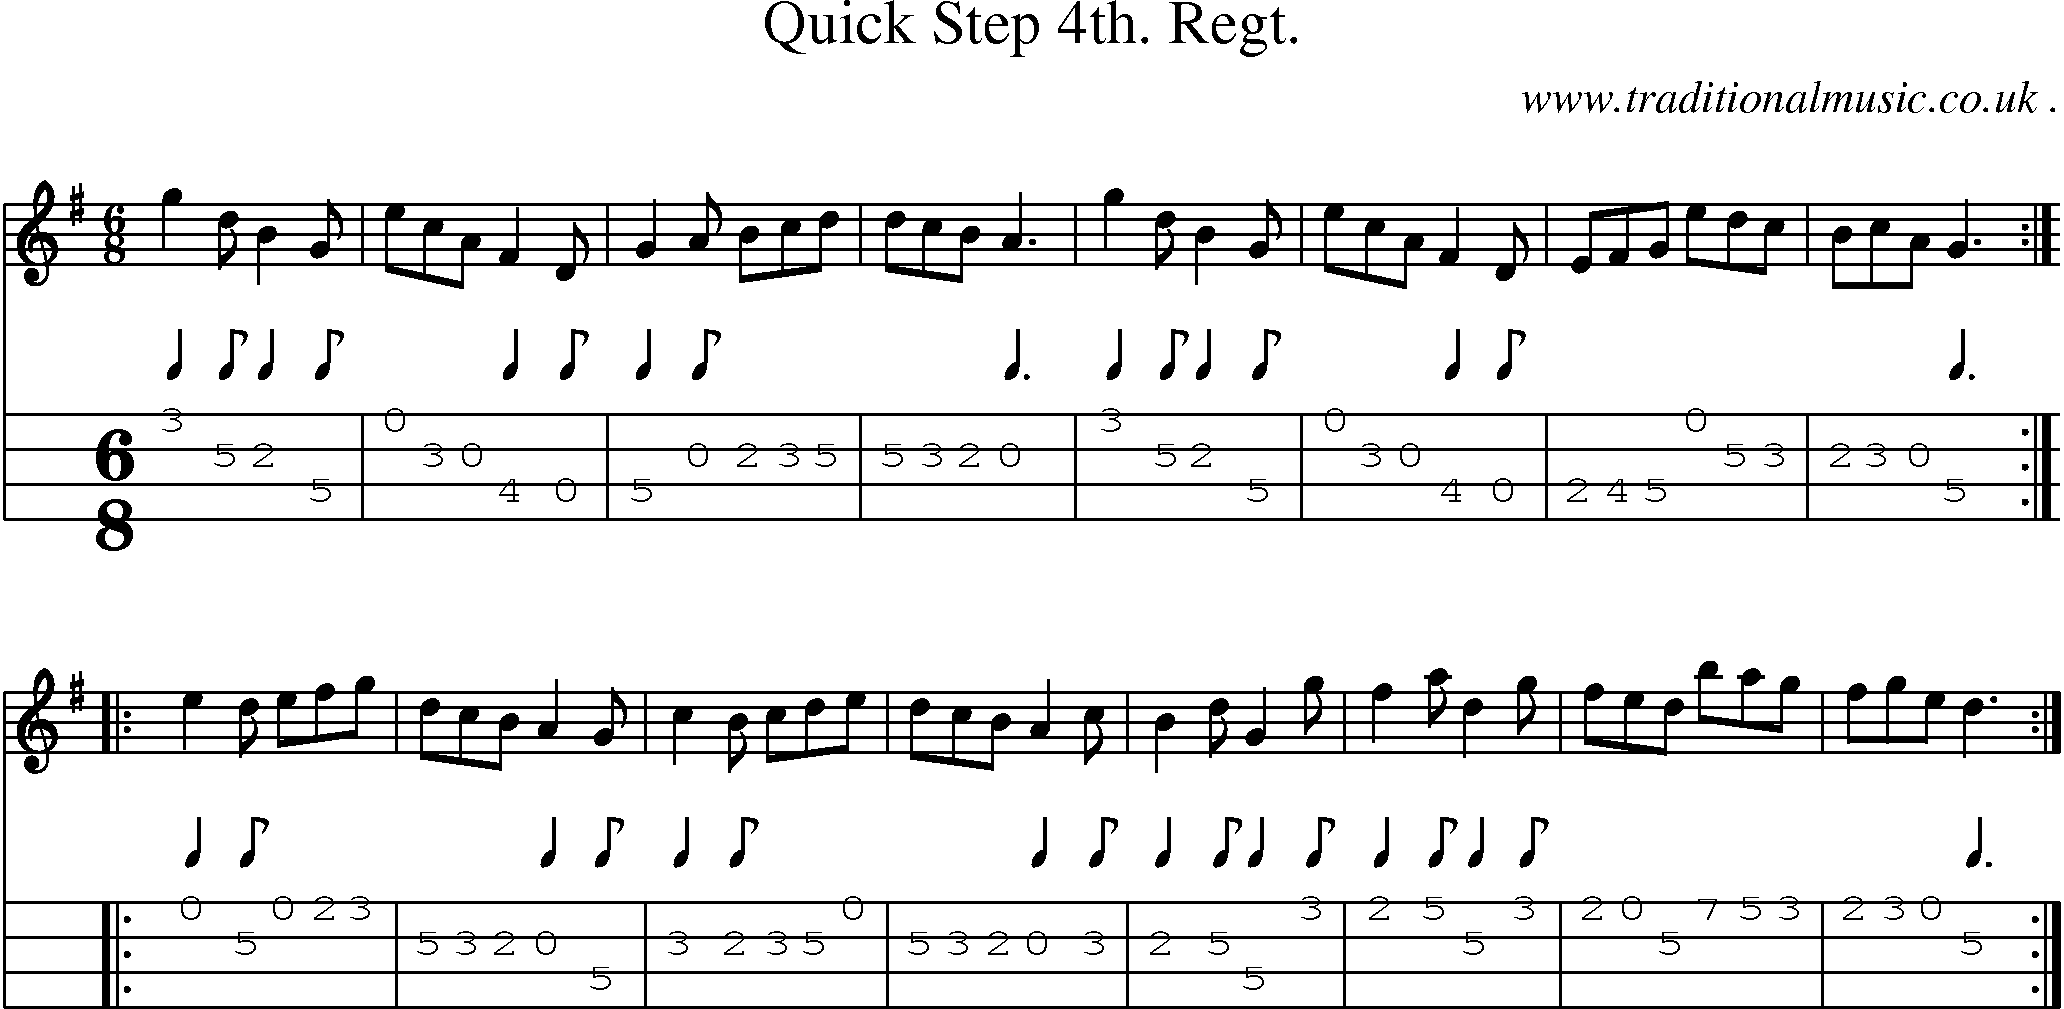 Sheet-Music and Mandolin Tabs for Quick Step 4th Regt